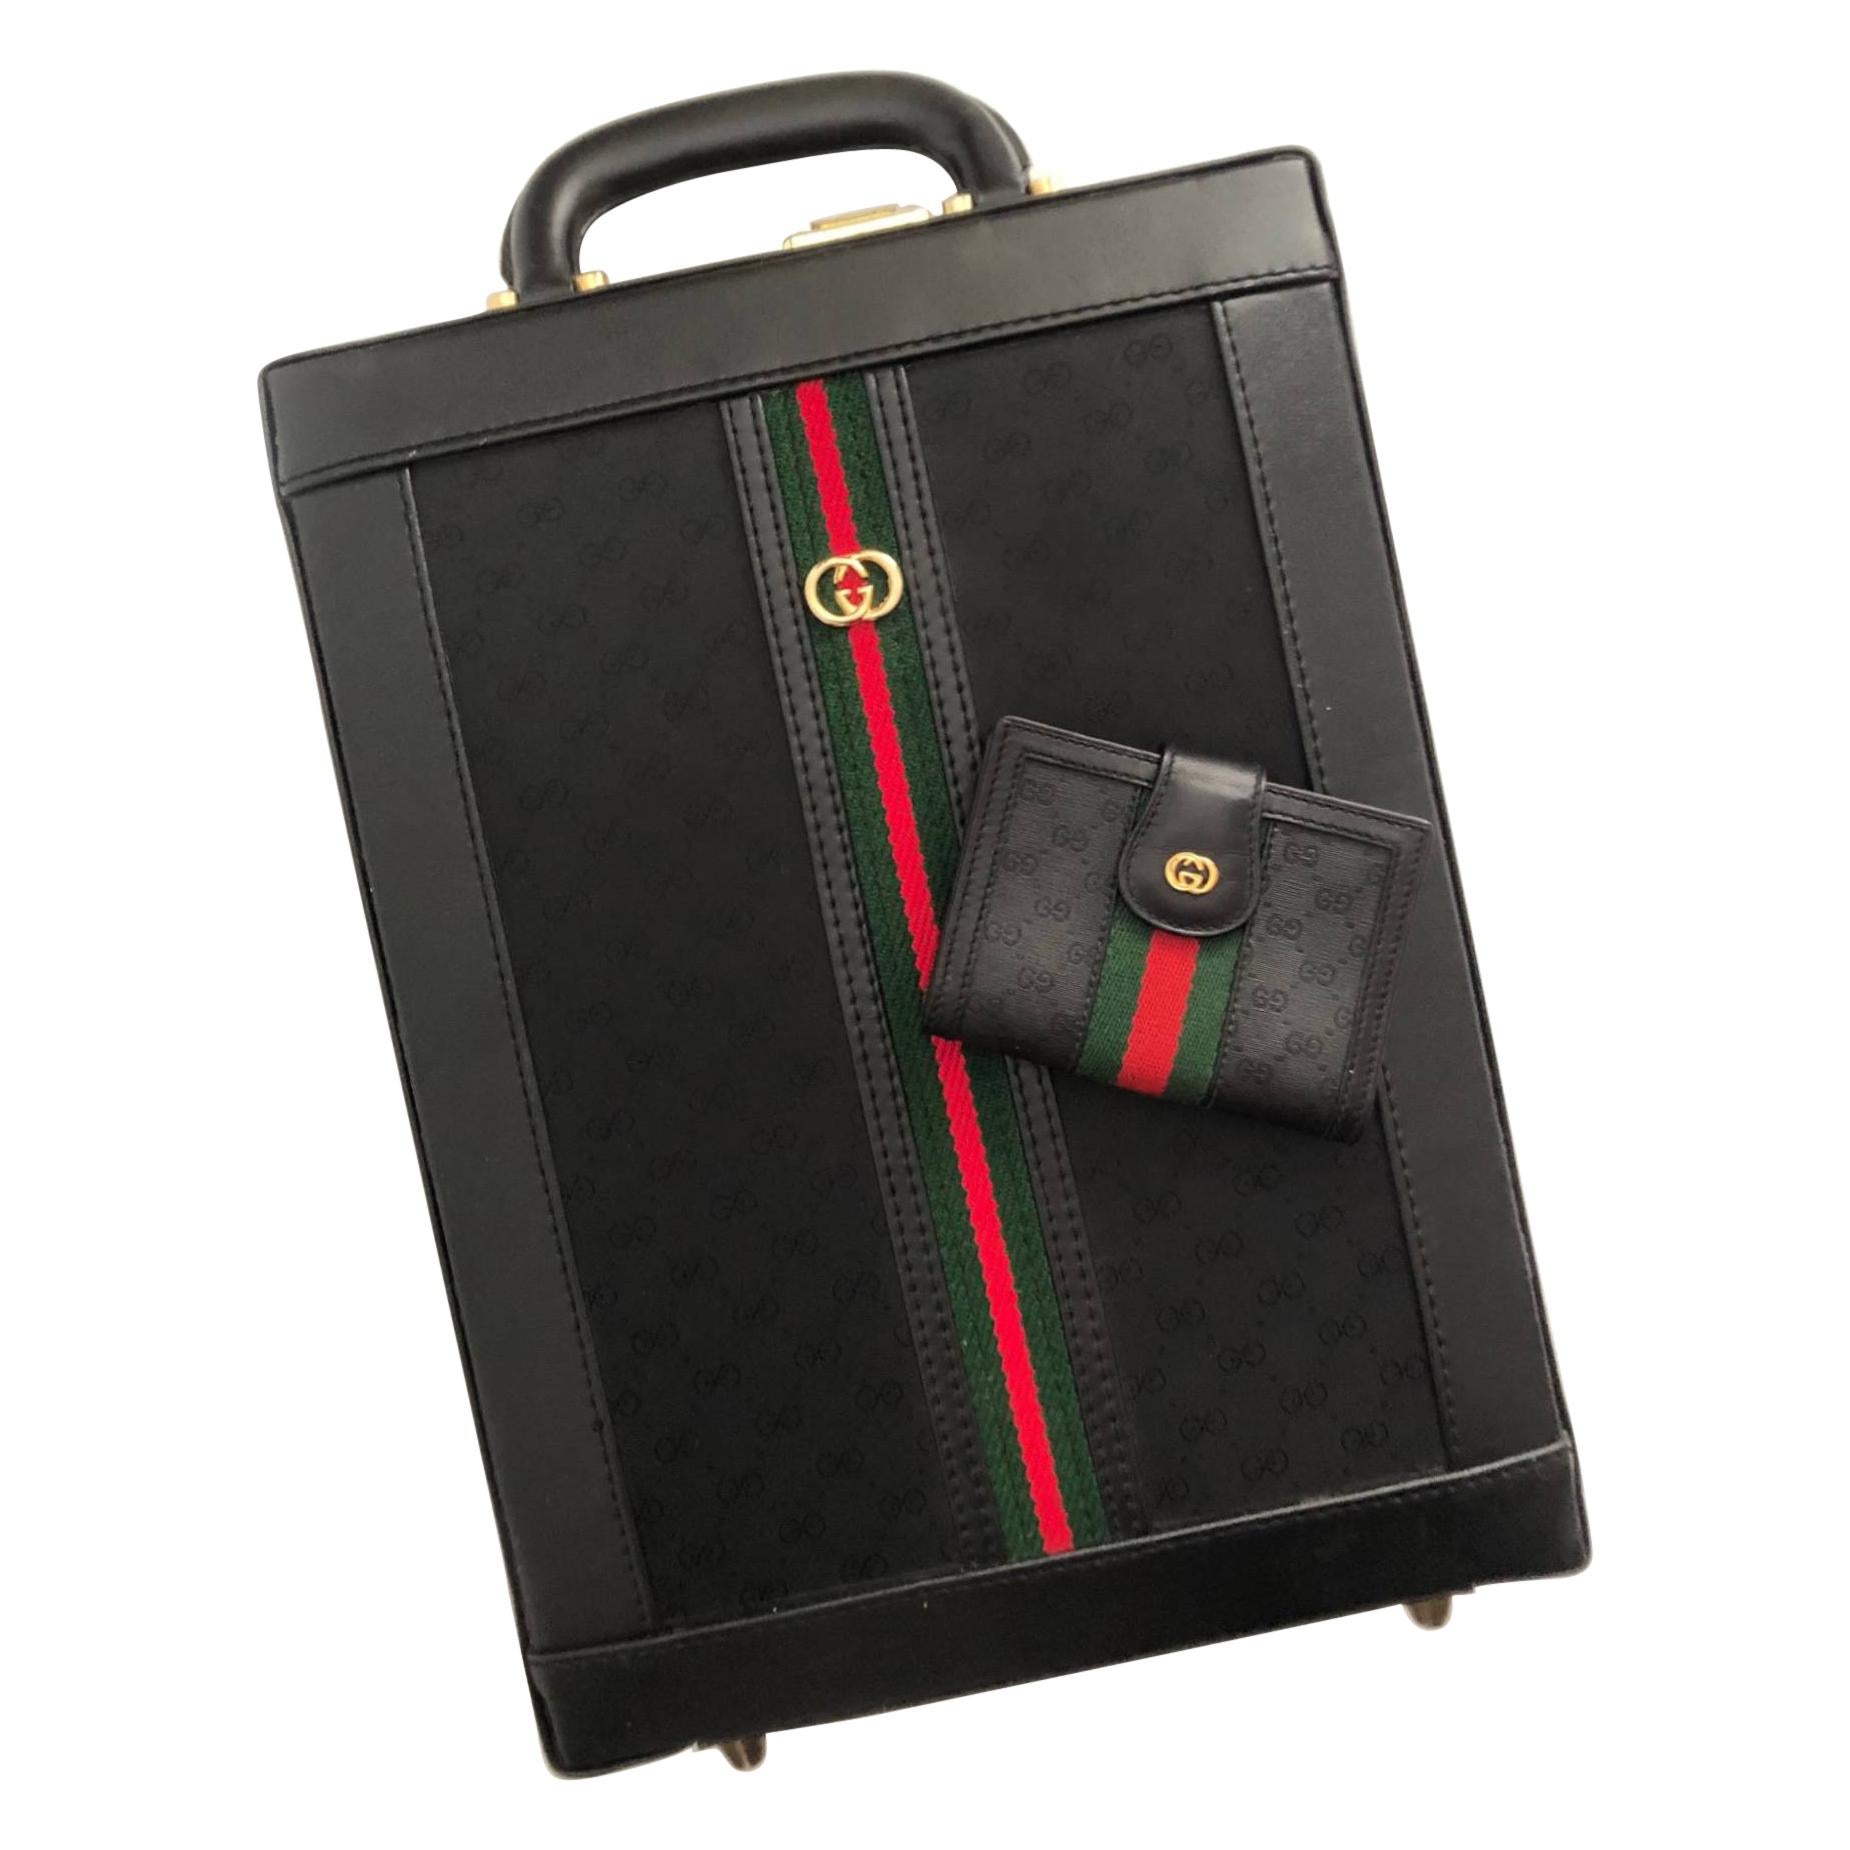 This is an amazing extremally rare find!
Gucci black monogram web stripe cloth leather vertical briefcase with matching mini wallet combo.

BRIEFCASE: This is the most incredible GUCCI piece! Its a black leather portrait briefcase from the 1980’s